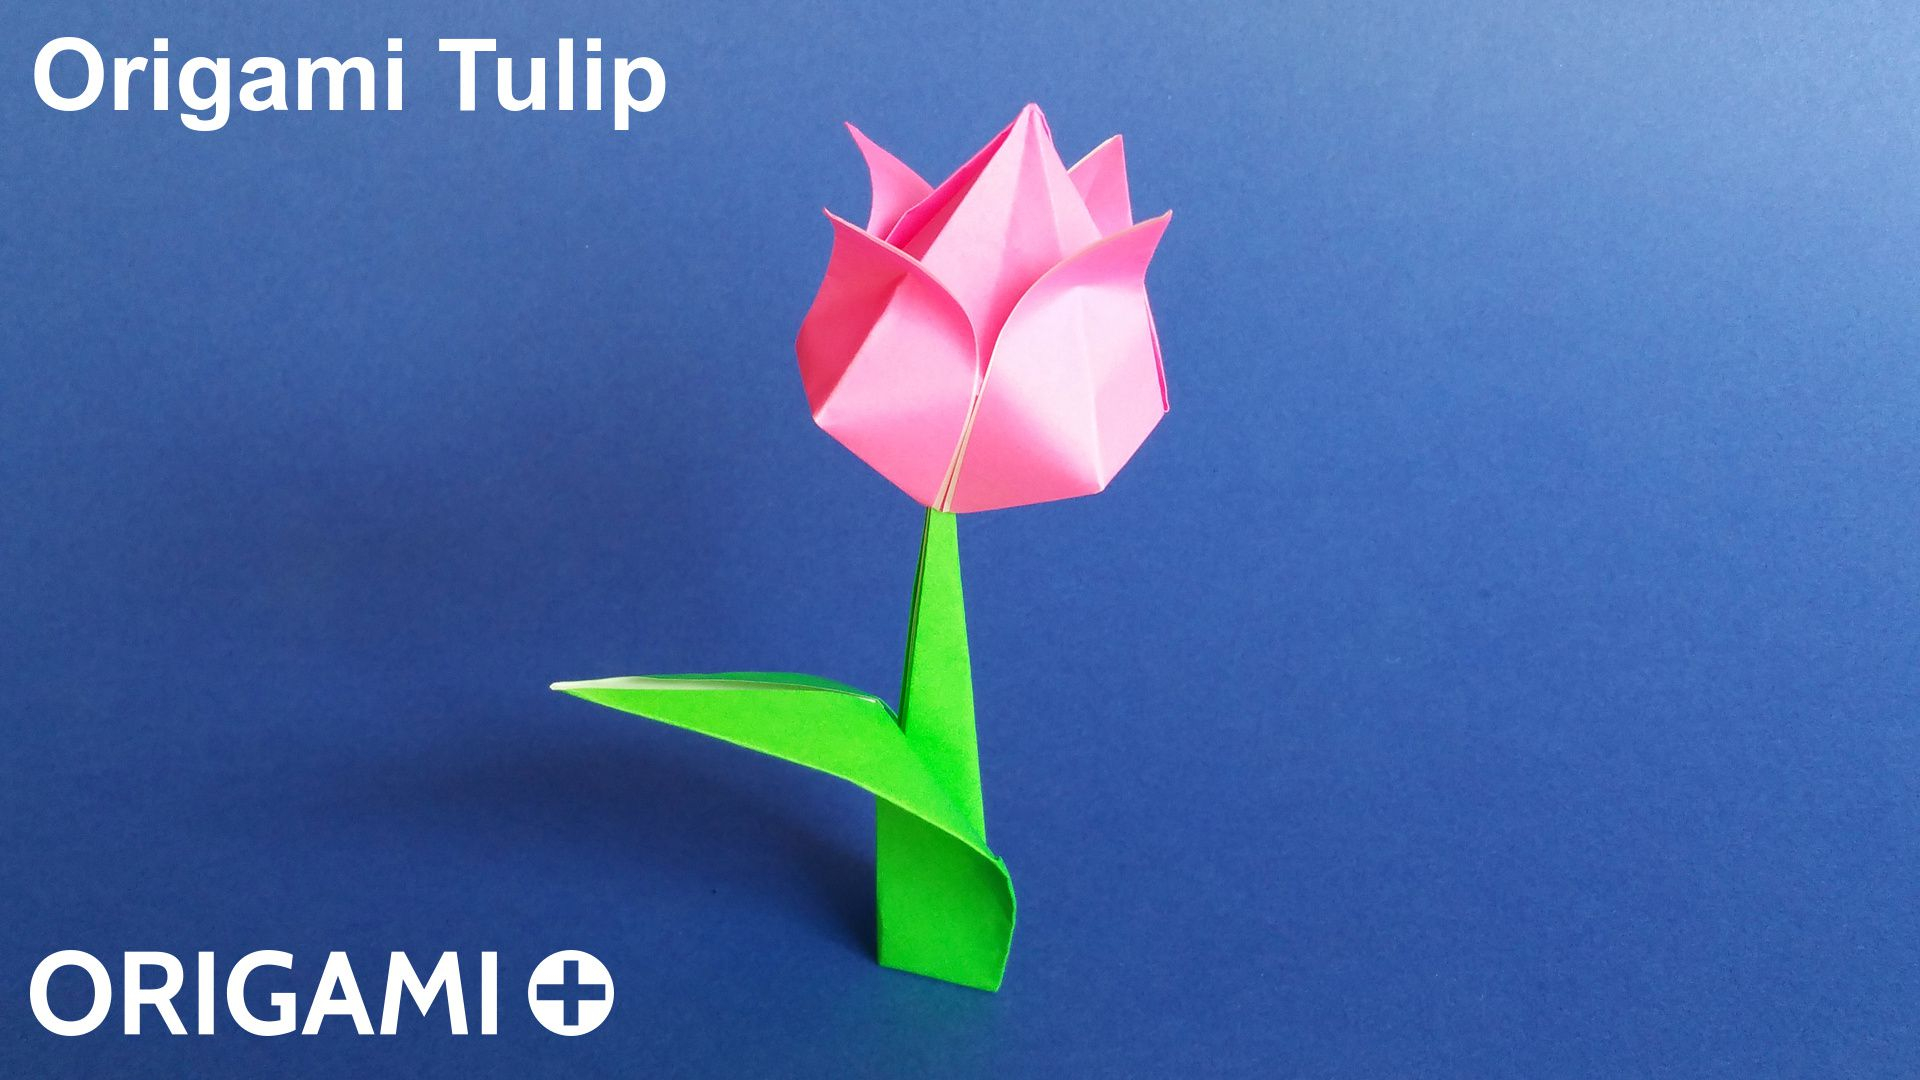 How To Make An Origami Tulip Origami Tulip